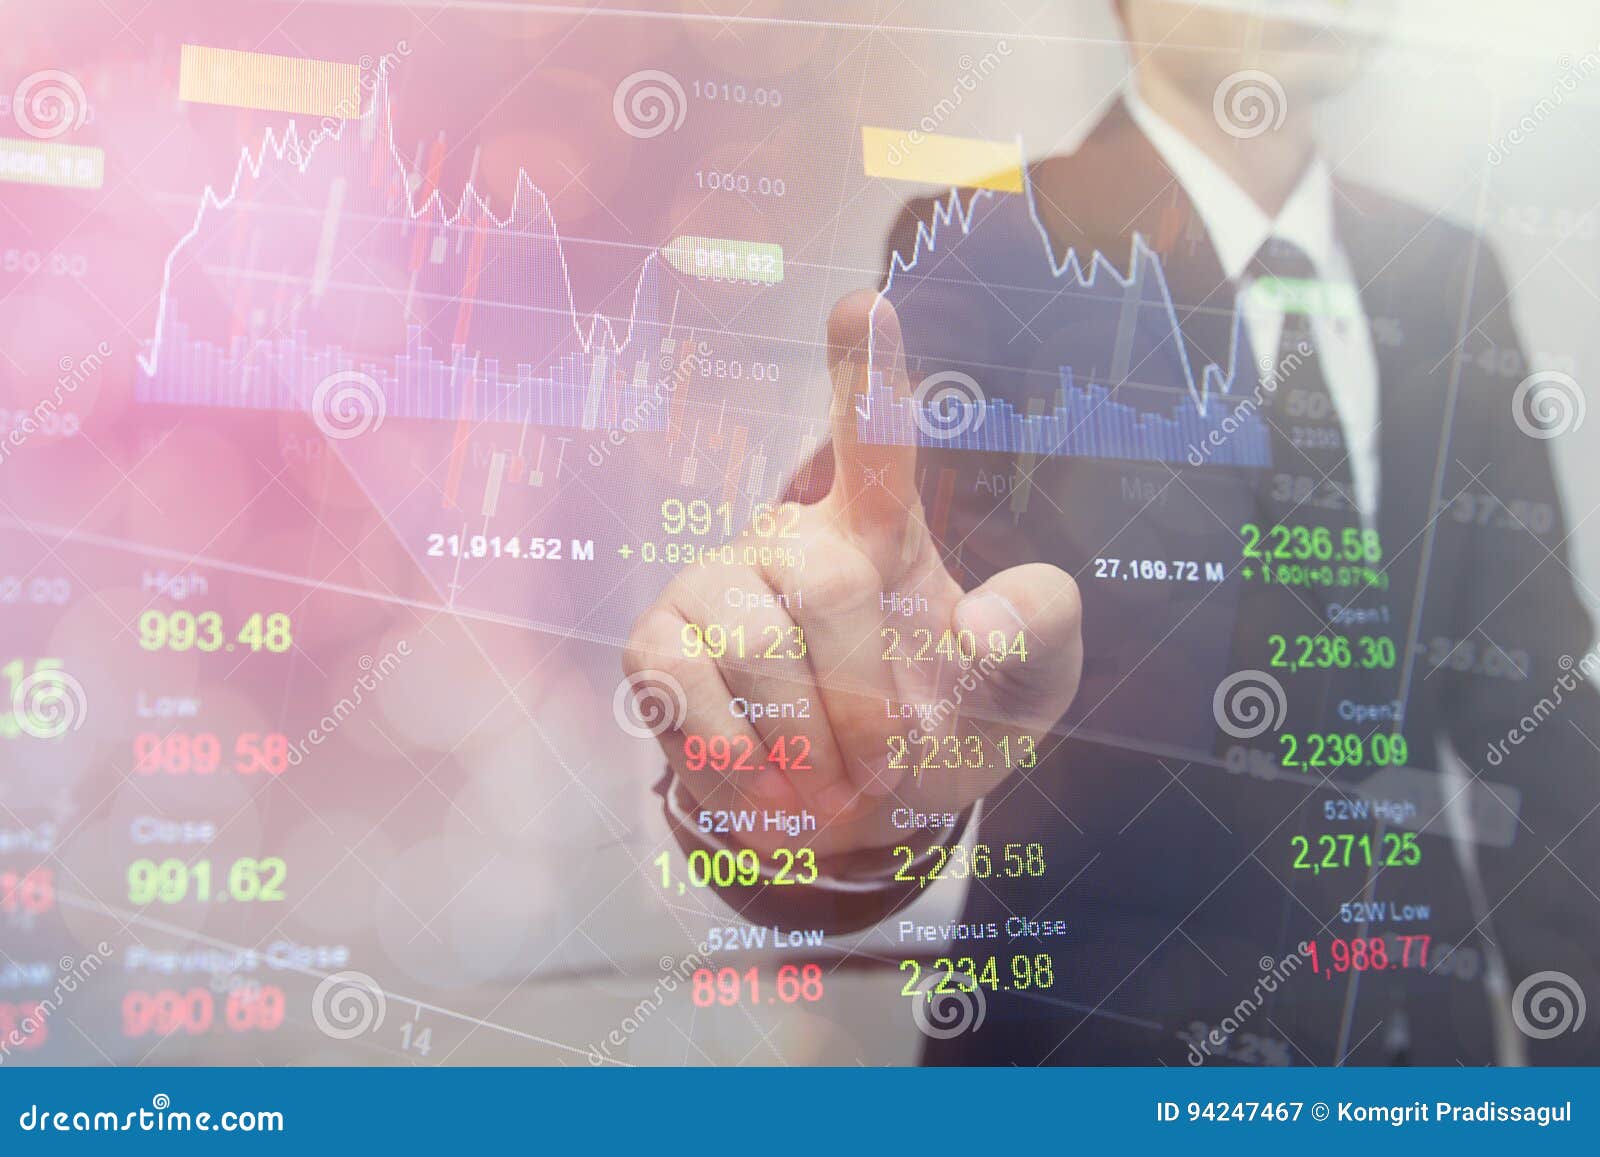 double exposure business people . stock markets financial or investment strategy